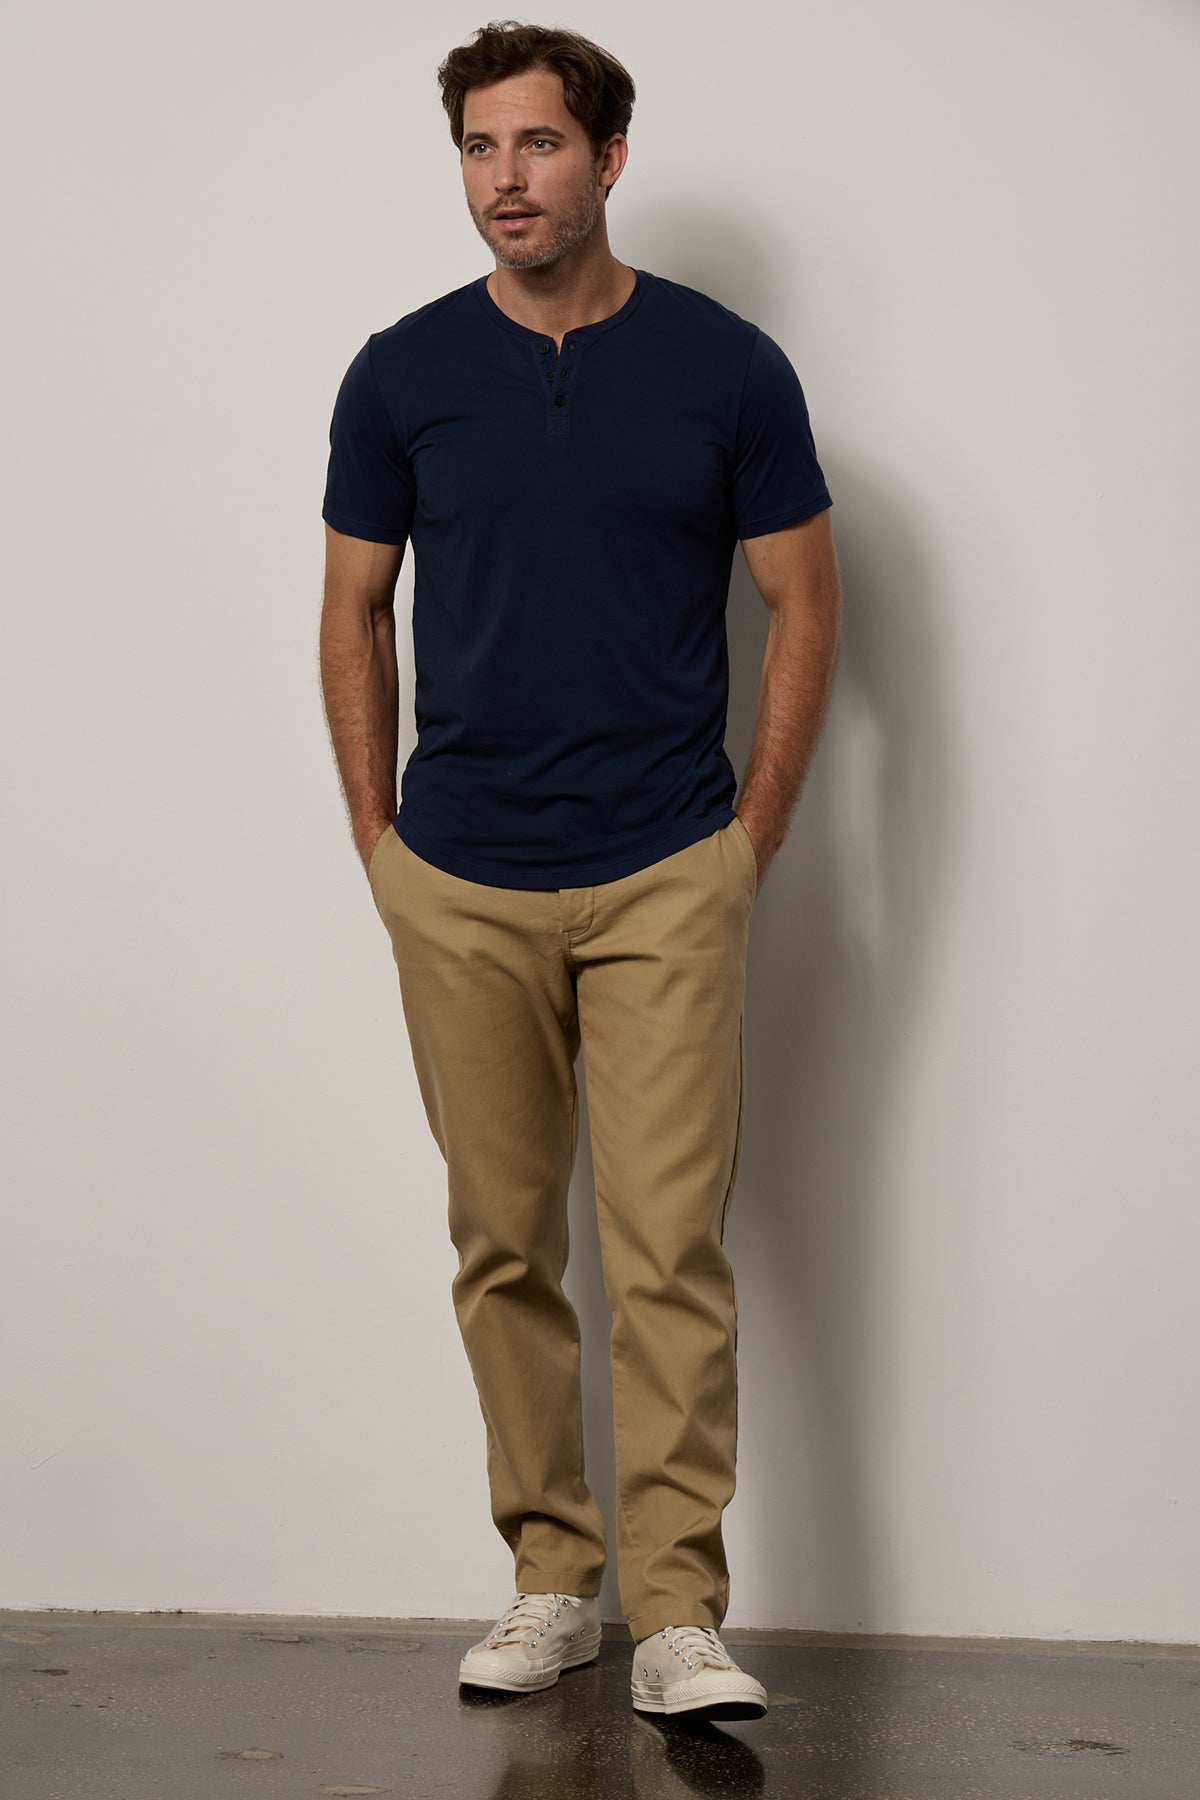   Fulton Short Sleeve Henley in midnight with Aiden pant in khaki full length front with Converse 